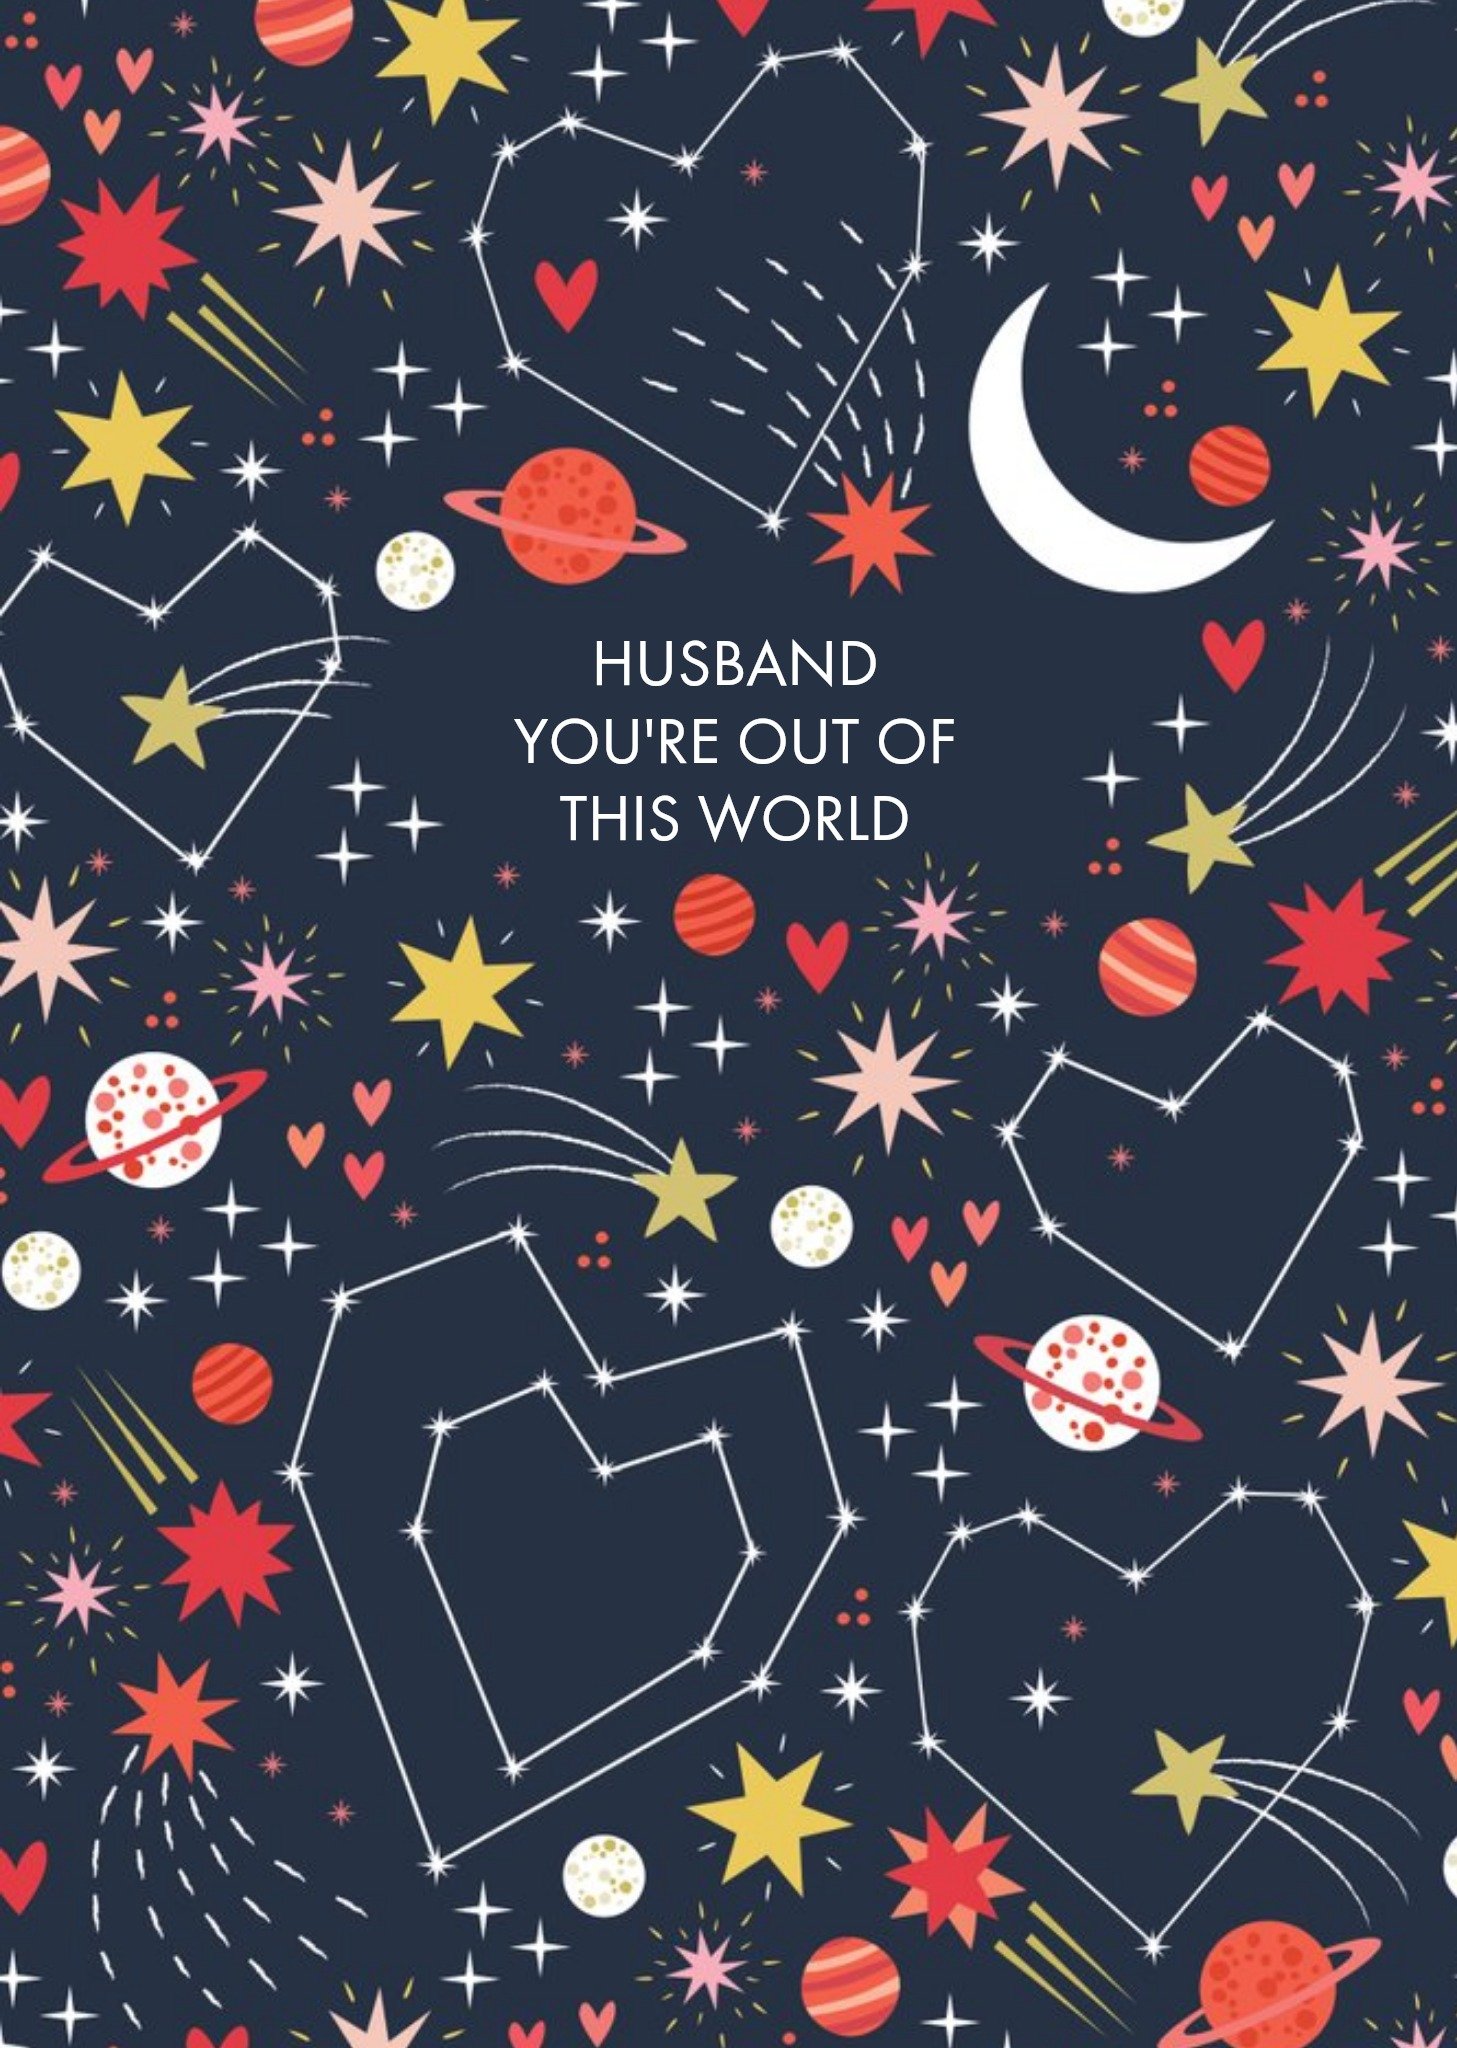 Moonpig You're Out Of This World Husband Valentine's Day Card Ecard